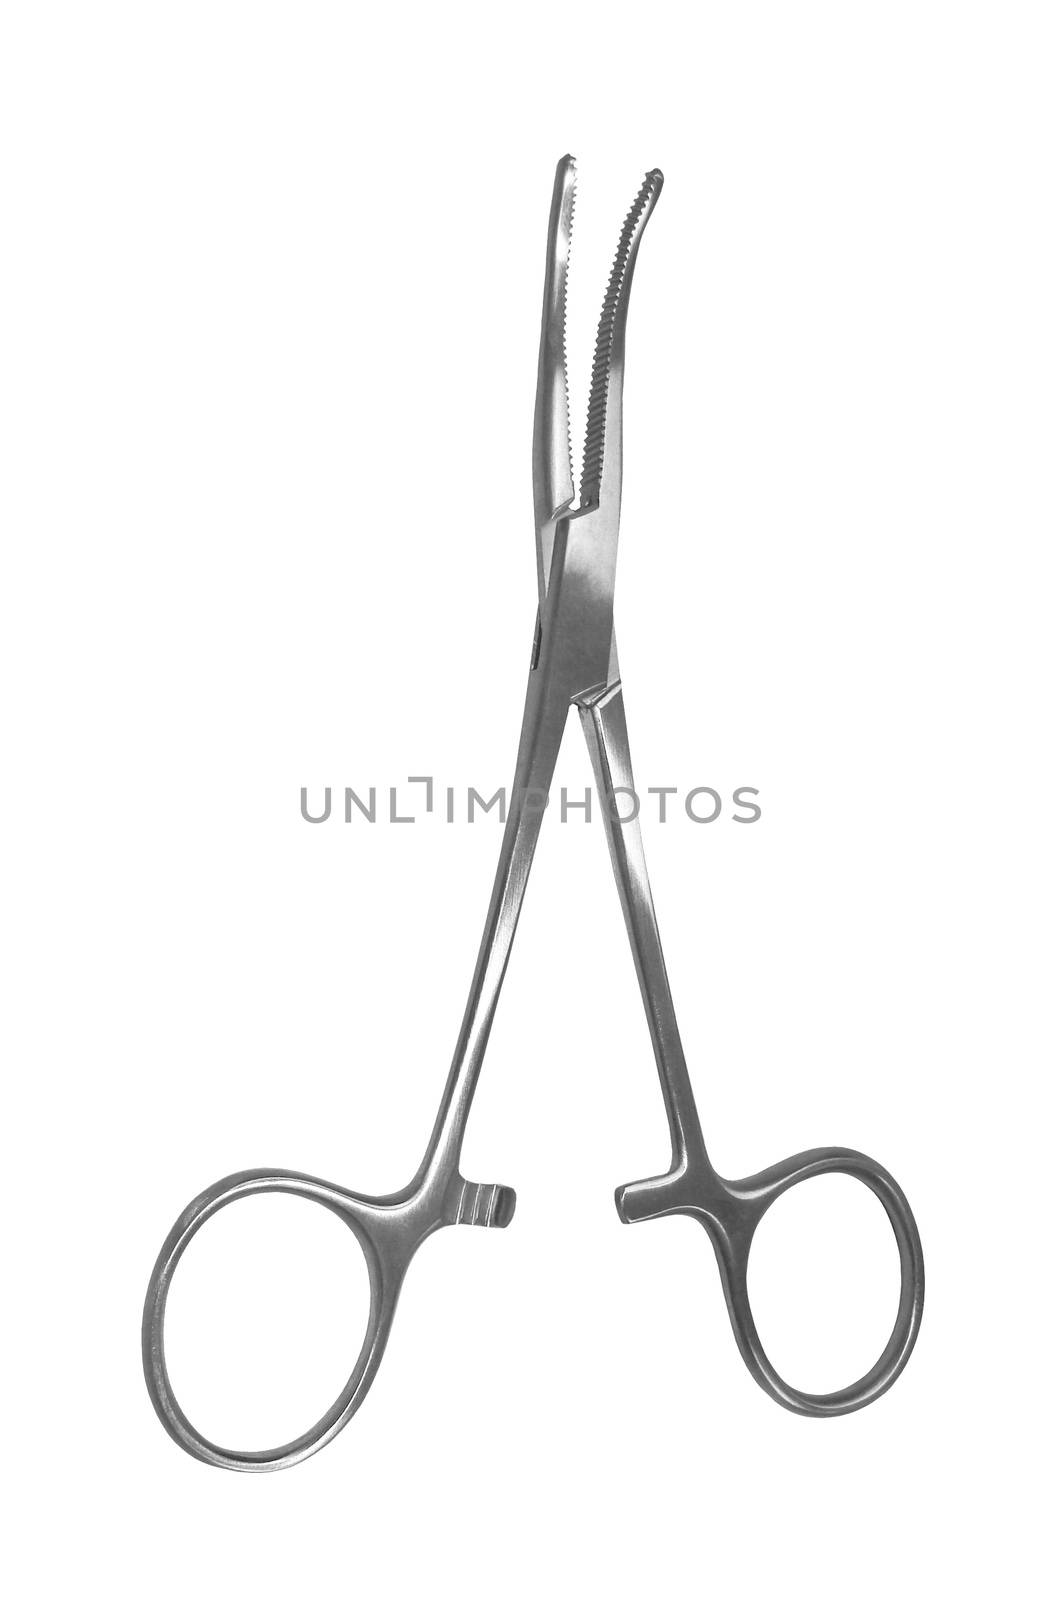 surgical clamps by ozaiachin